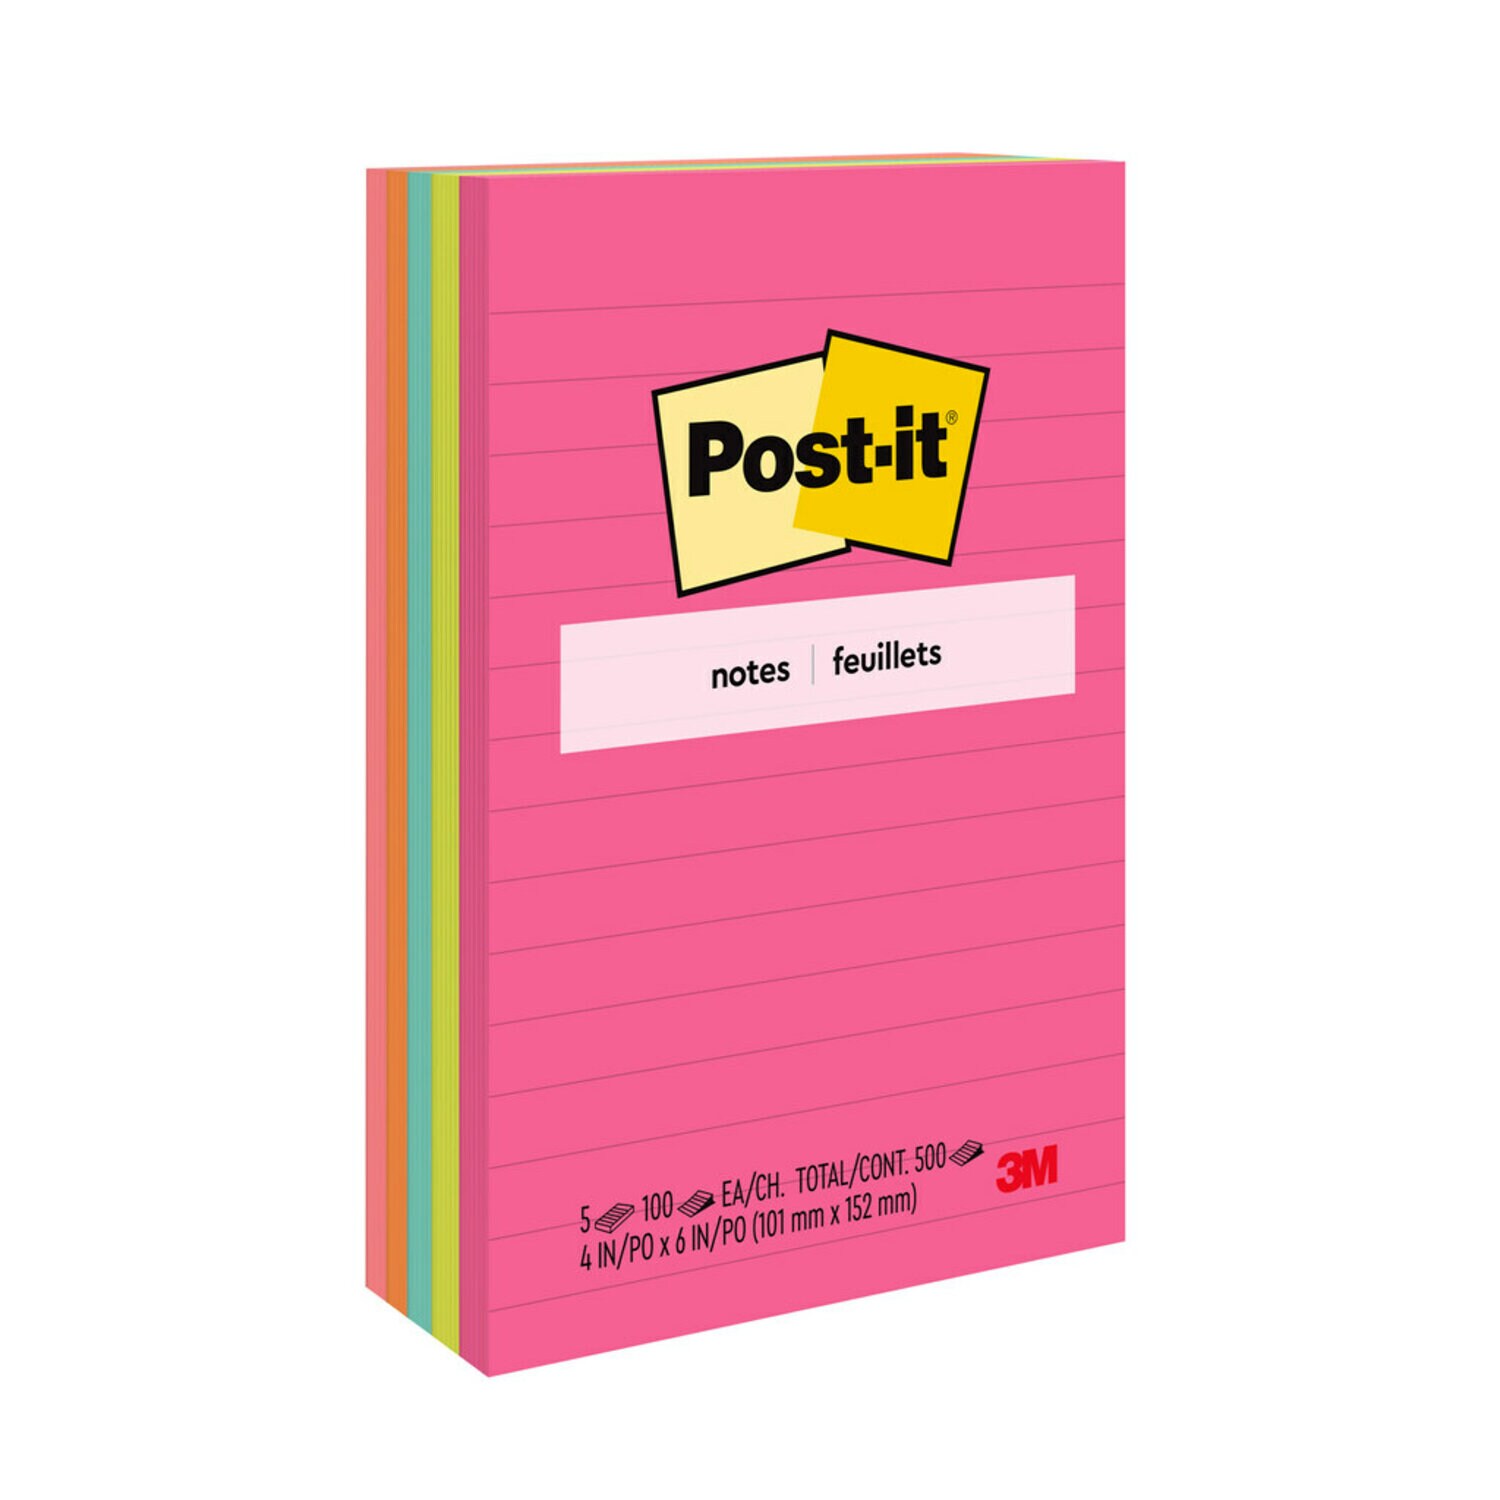 7100235646 - Post-it Notes 660-5AN, 4 in x 6 in (101 mm x 152 mm)